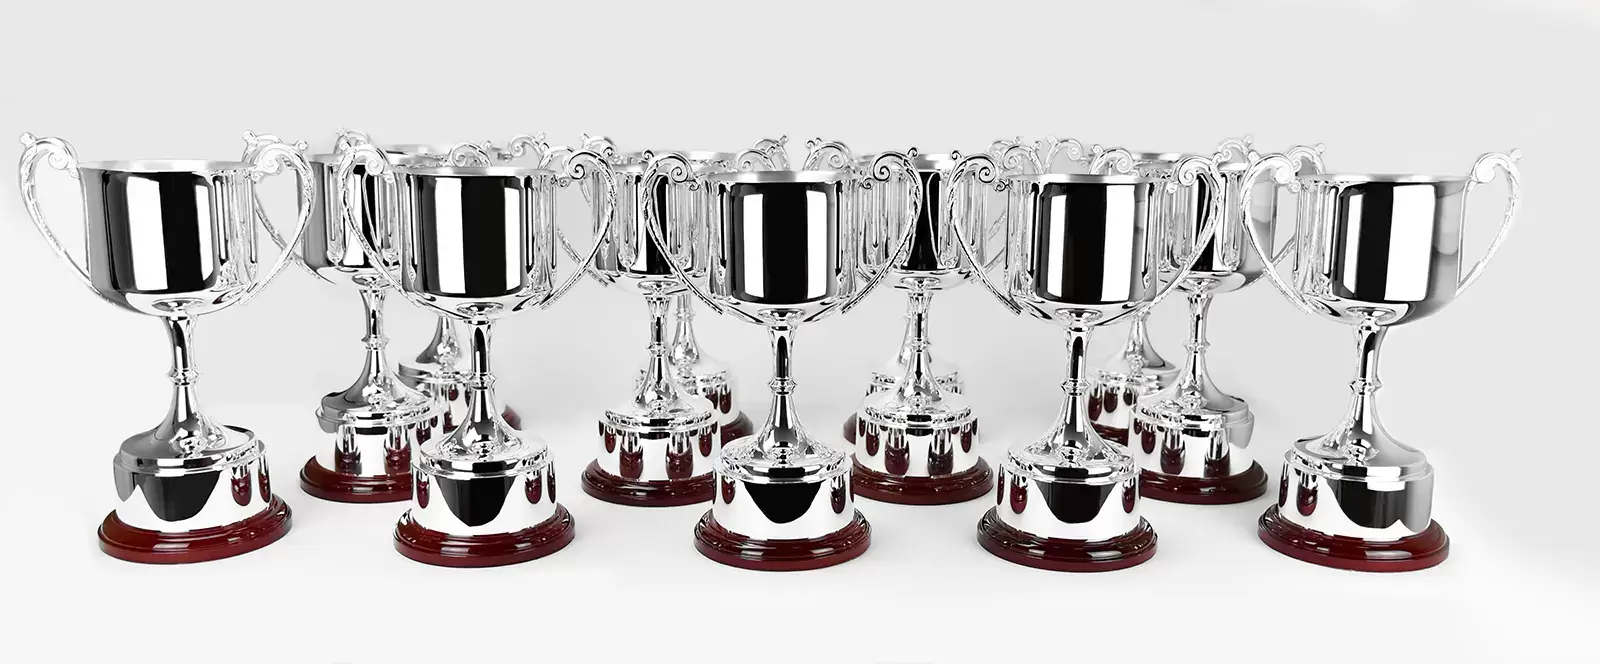 Trophies Awards Engraved